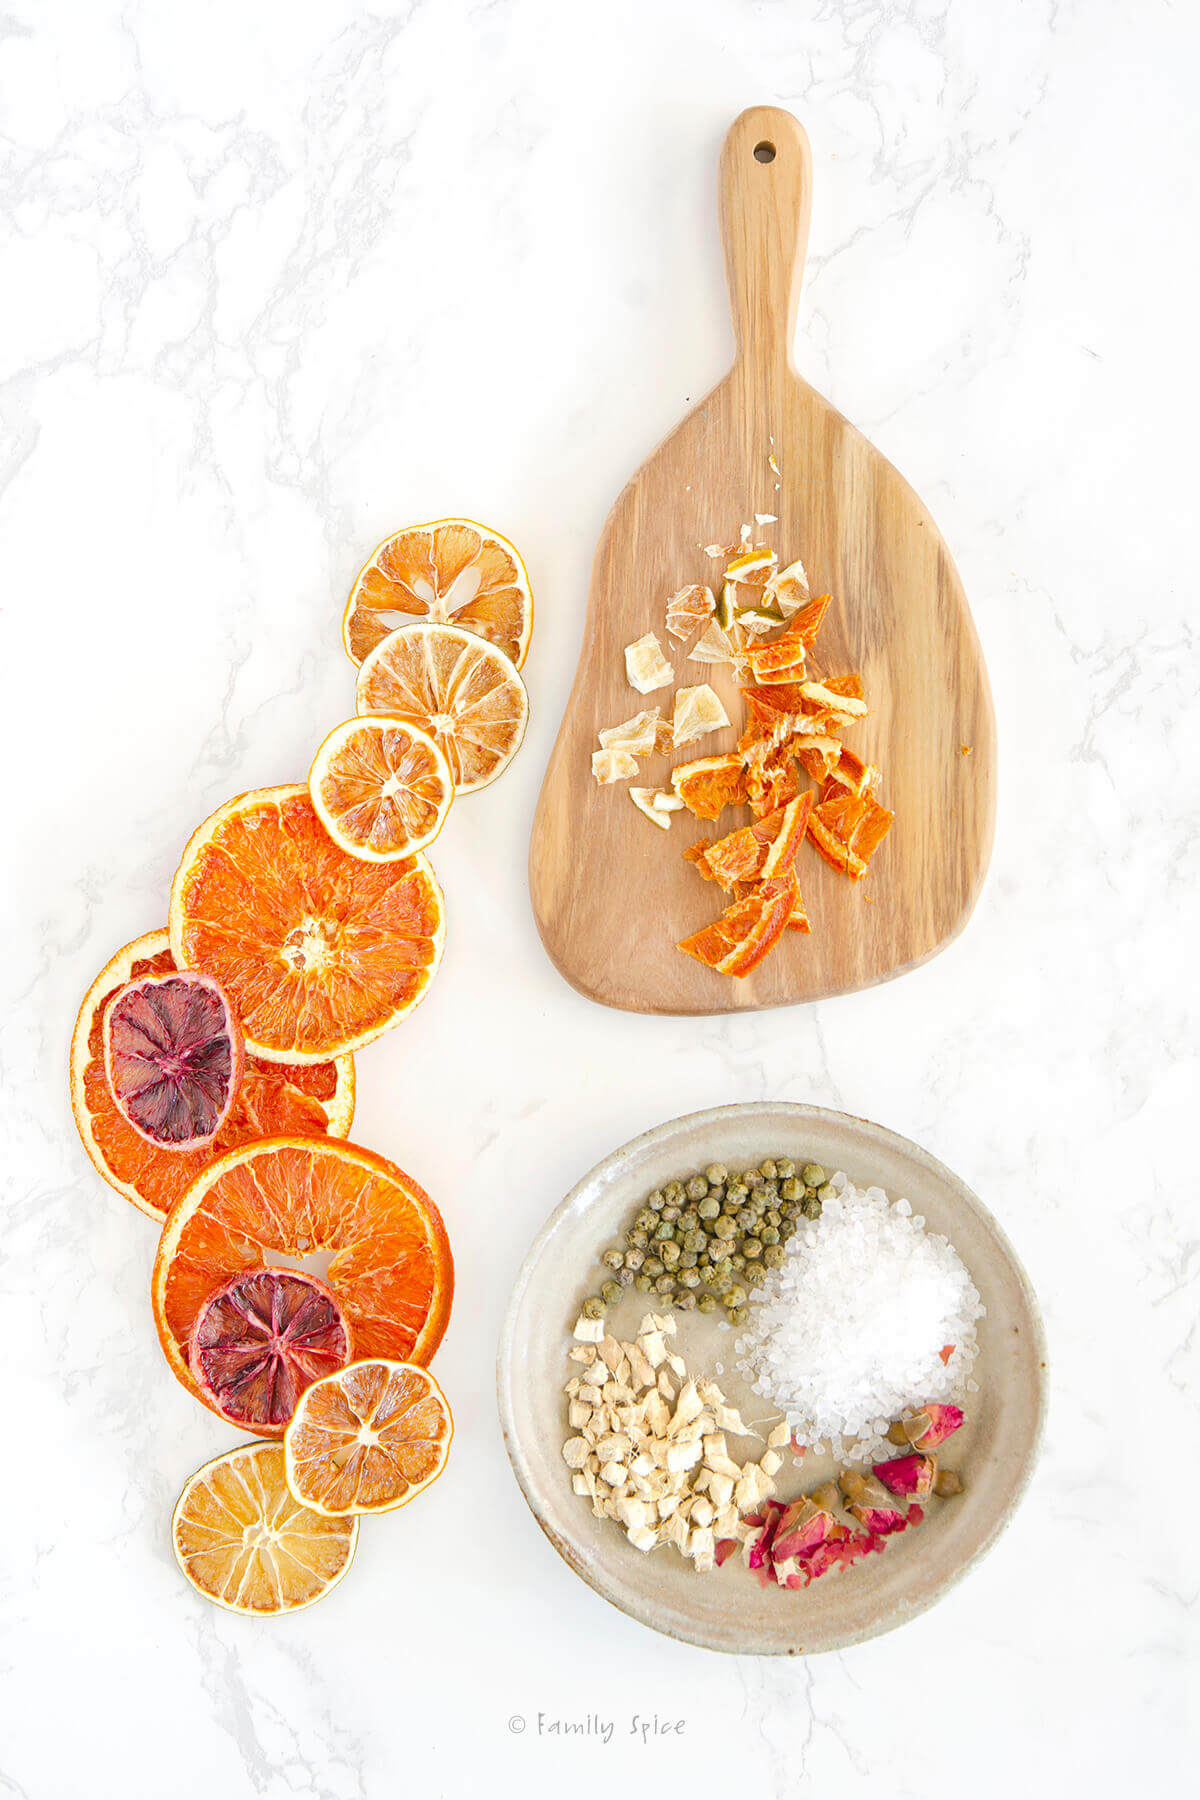 A cutting board with chopped dried oranges, a shallow bowl with coarse sea salt, green pepper corns, dried ginger and dried roses with assorted dried citrus slices